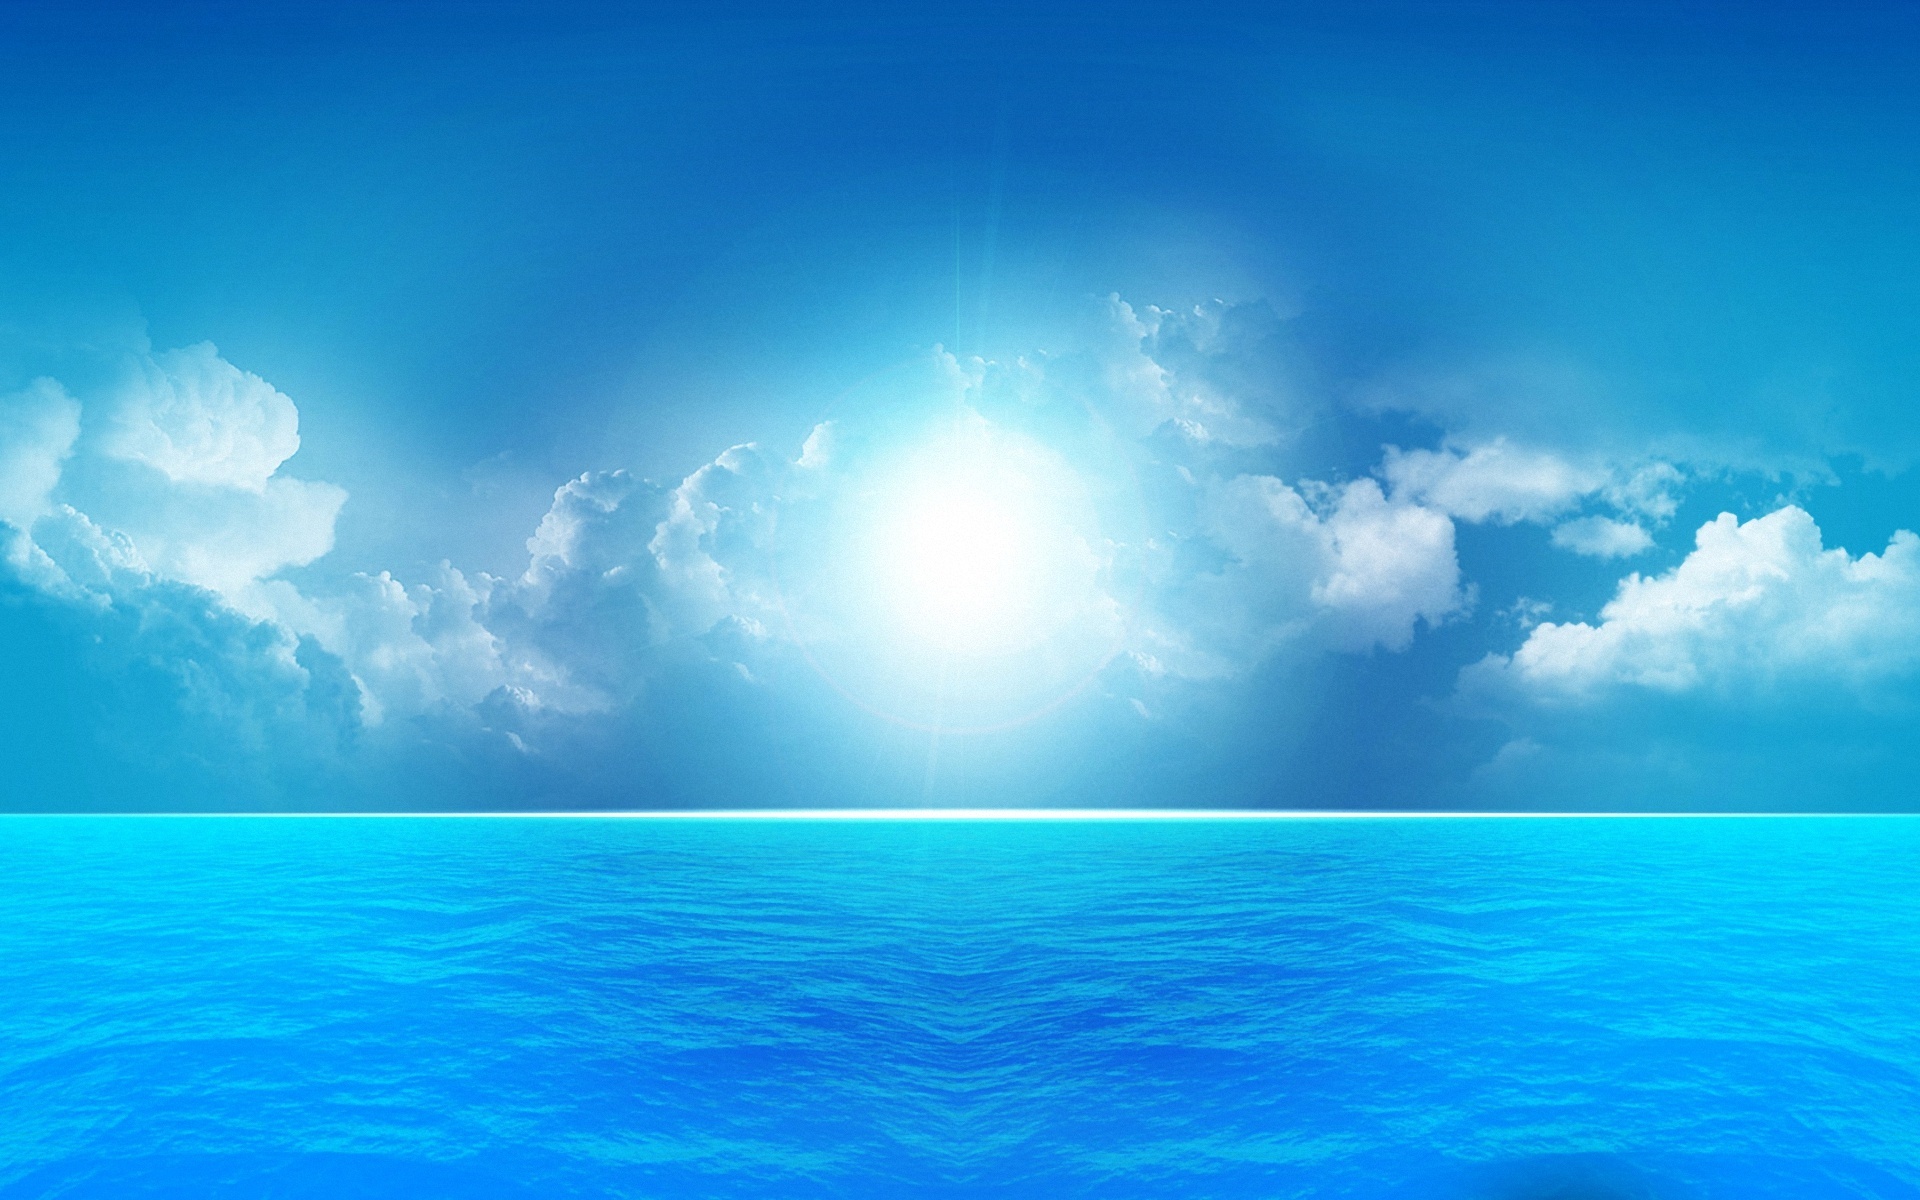 Beautiful Summer 2012 - a blue day at sea Wallpapers - HD Wallpapers ...